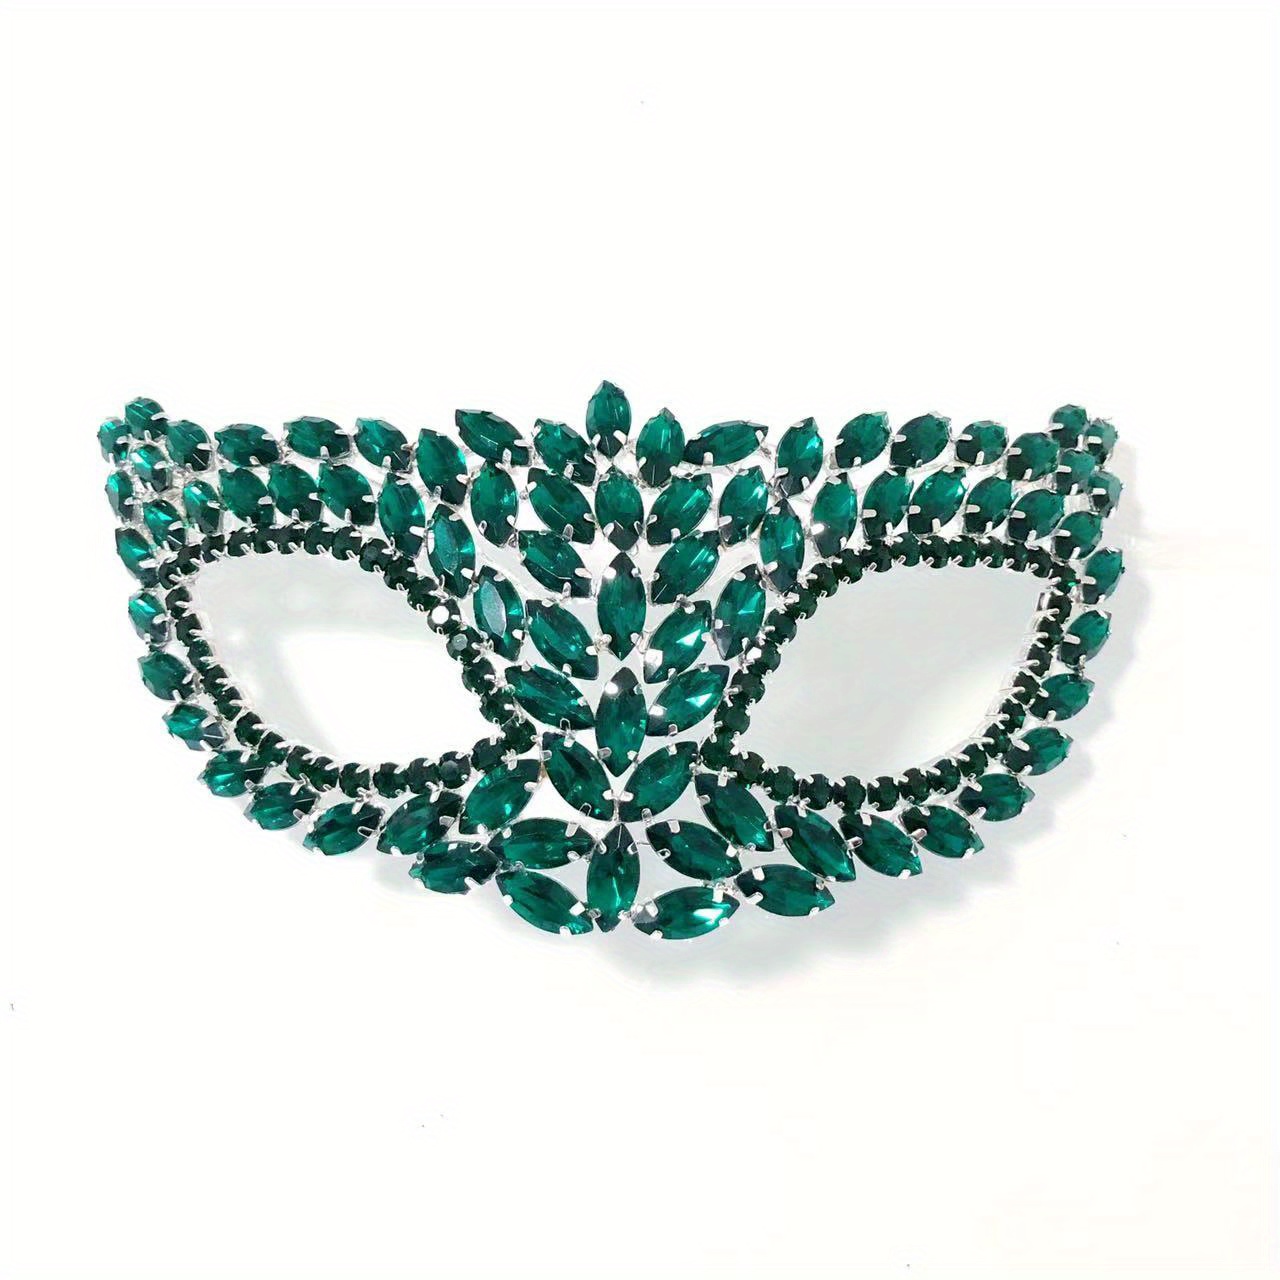 Sparkling Rhinestone Diamond Rhinestone Face Mask For Women Perfect For  Nightclubs, Parties, Festivals, And Wild Jewelry From Prettyrose, $2.68